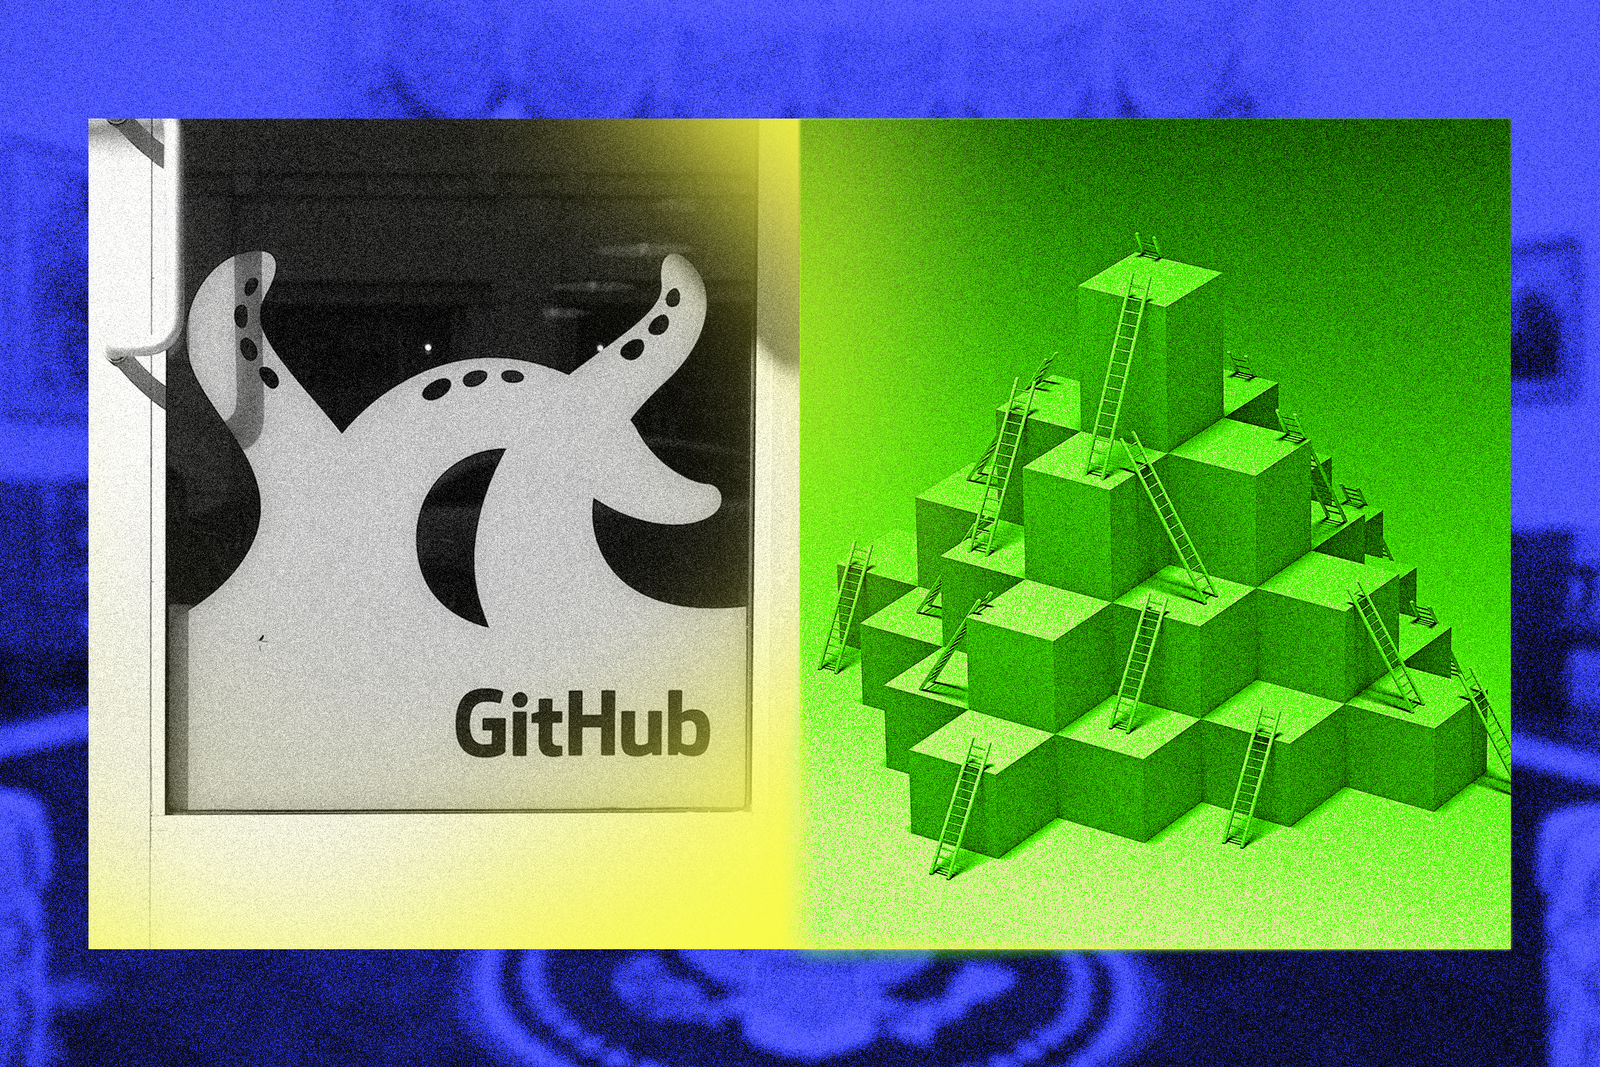 Remembering GitHub's Office, a Monument to Tech Culture